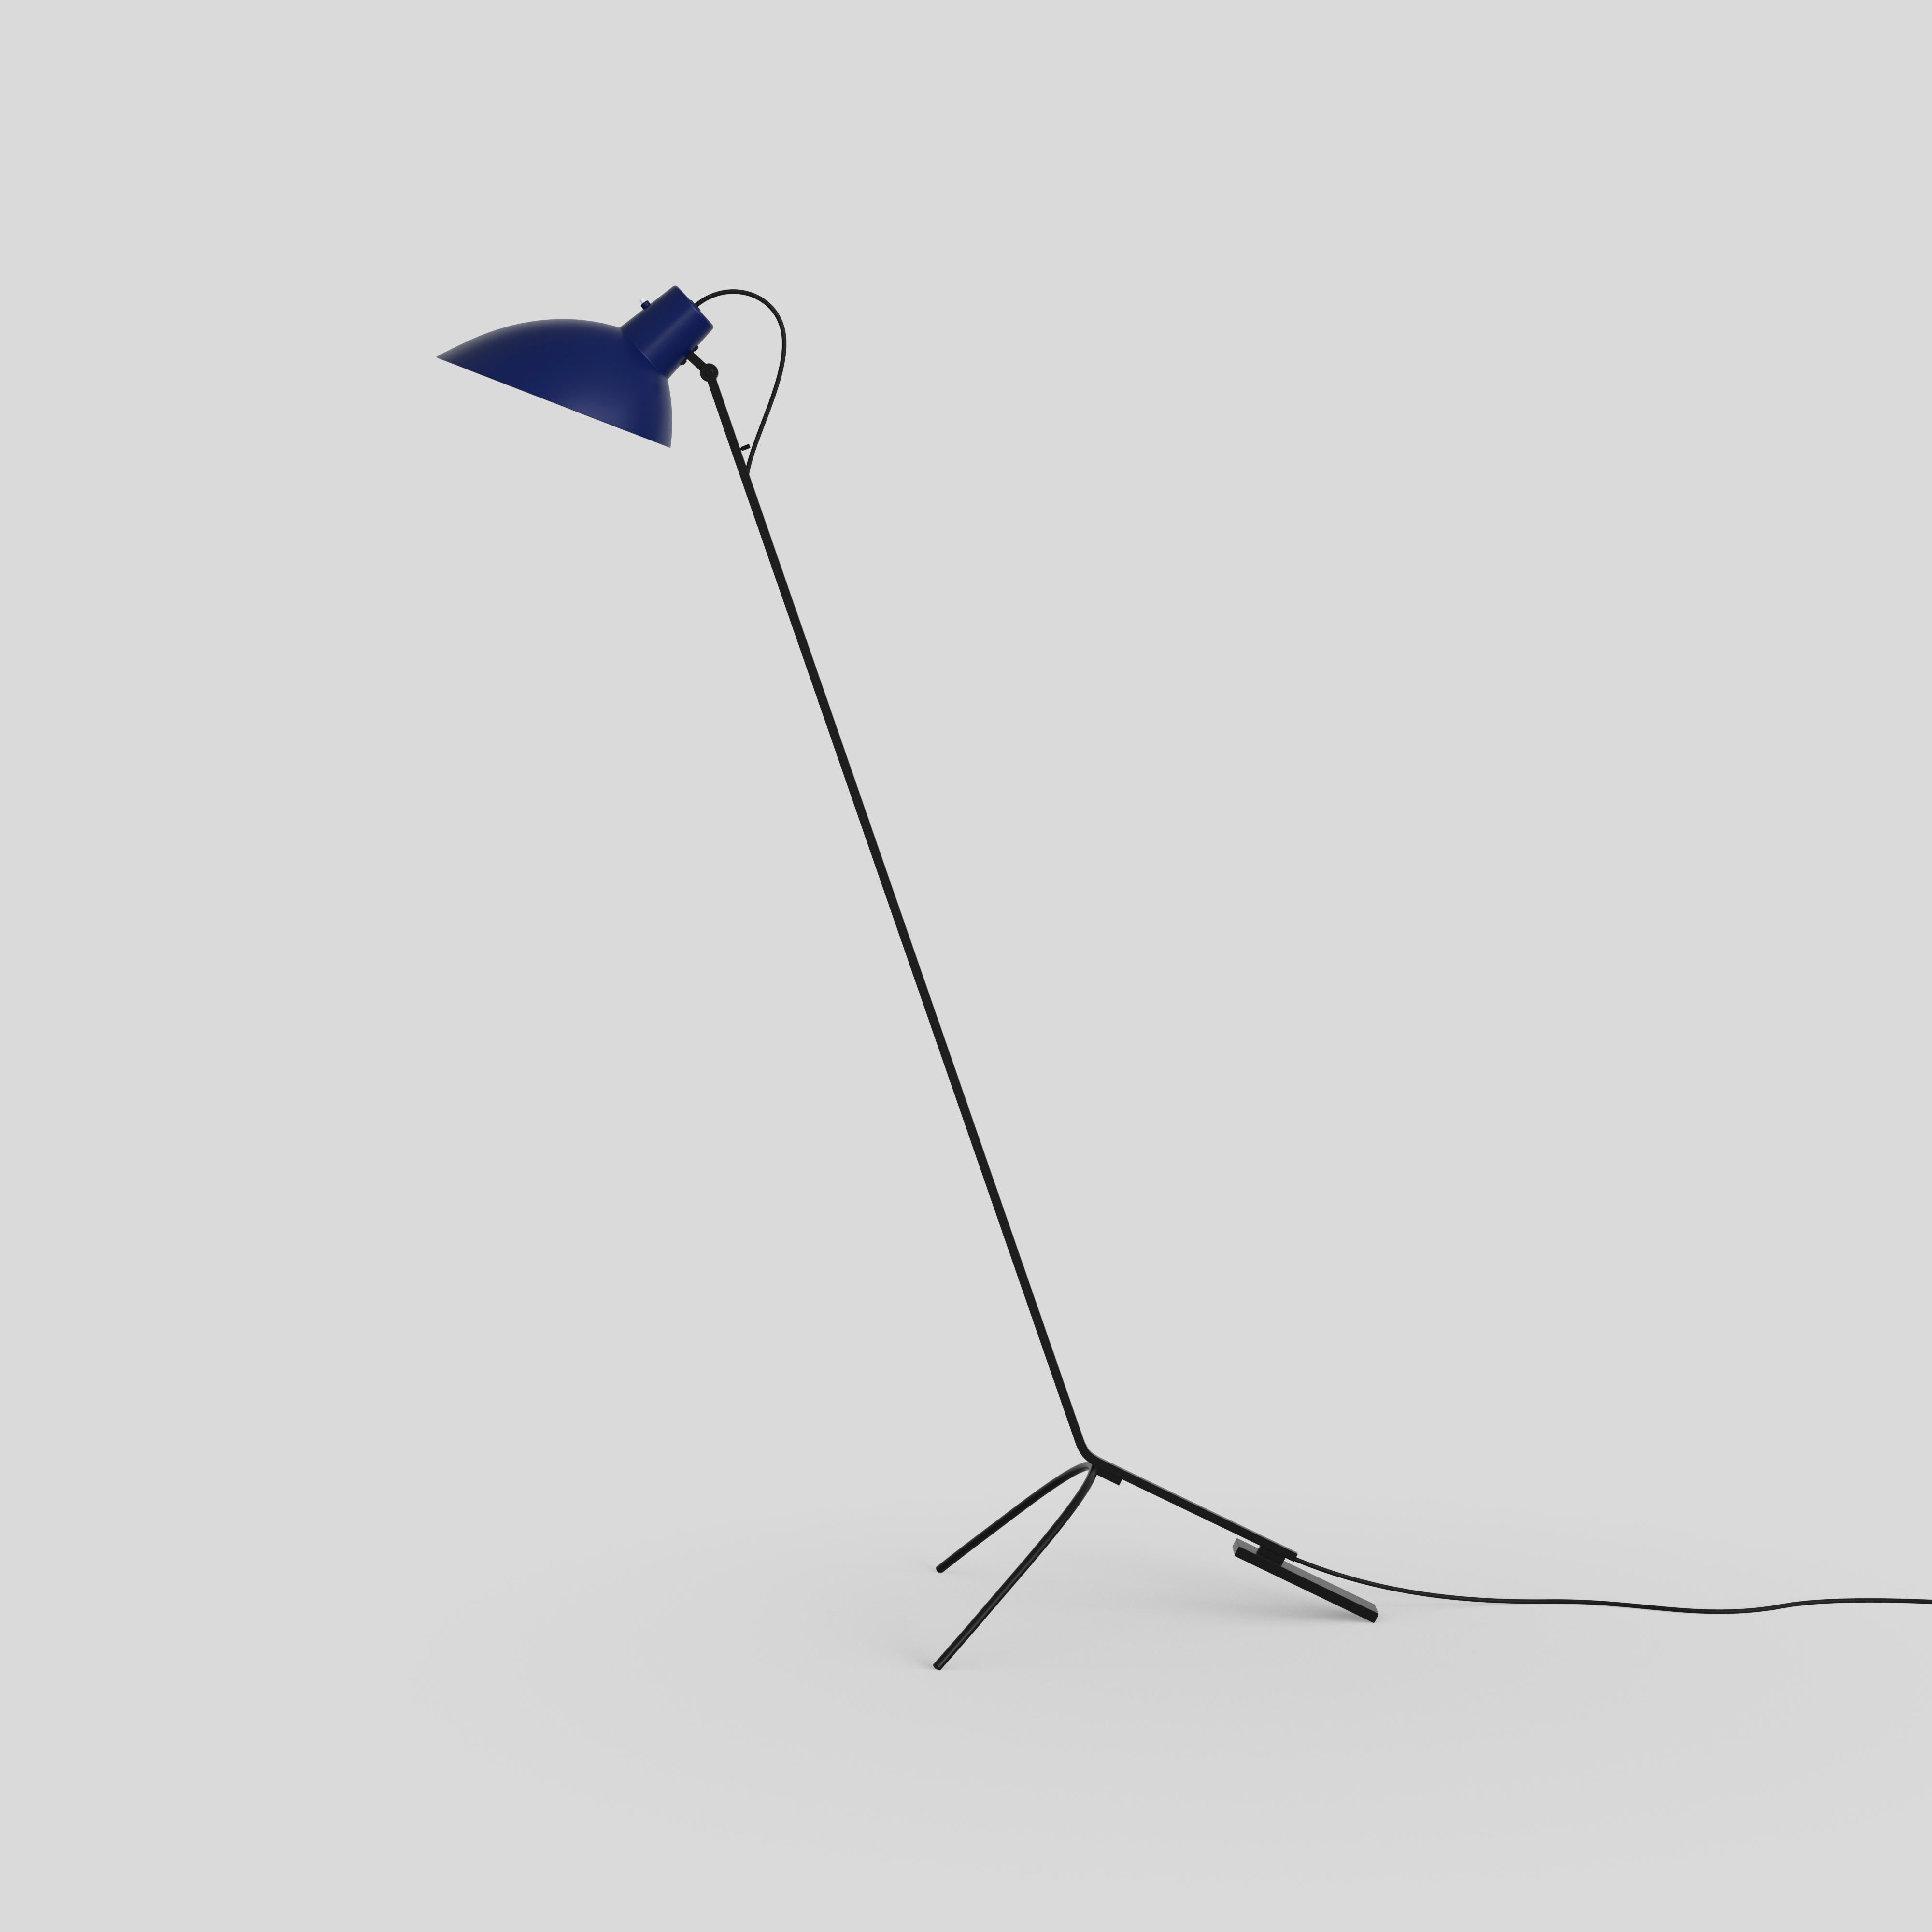 VV Cinquanta floor lamp
Design by Vittoriano Viganò
This version is with blue lacquered reflector and black frame.

The VV Cinquanta features an elegant and versatile posable direct light source that can swivel and tilt, from direct working